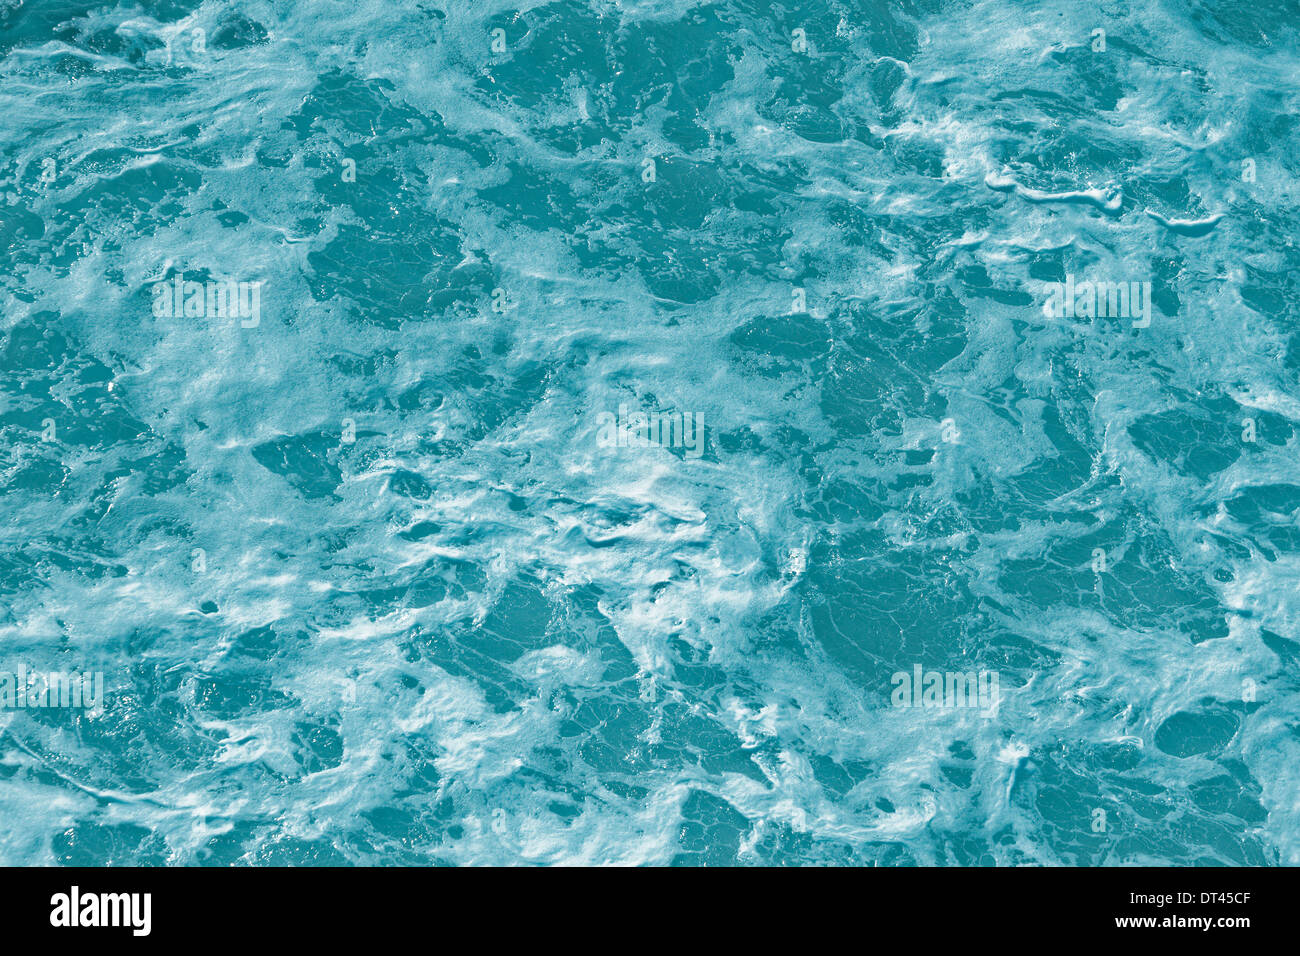 Foam on the water blue background Stock Photo